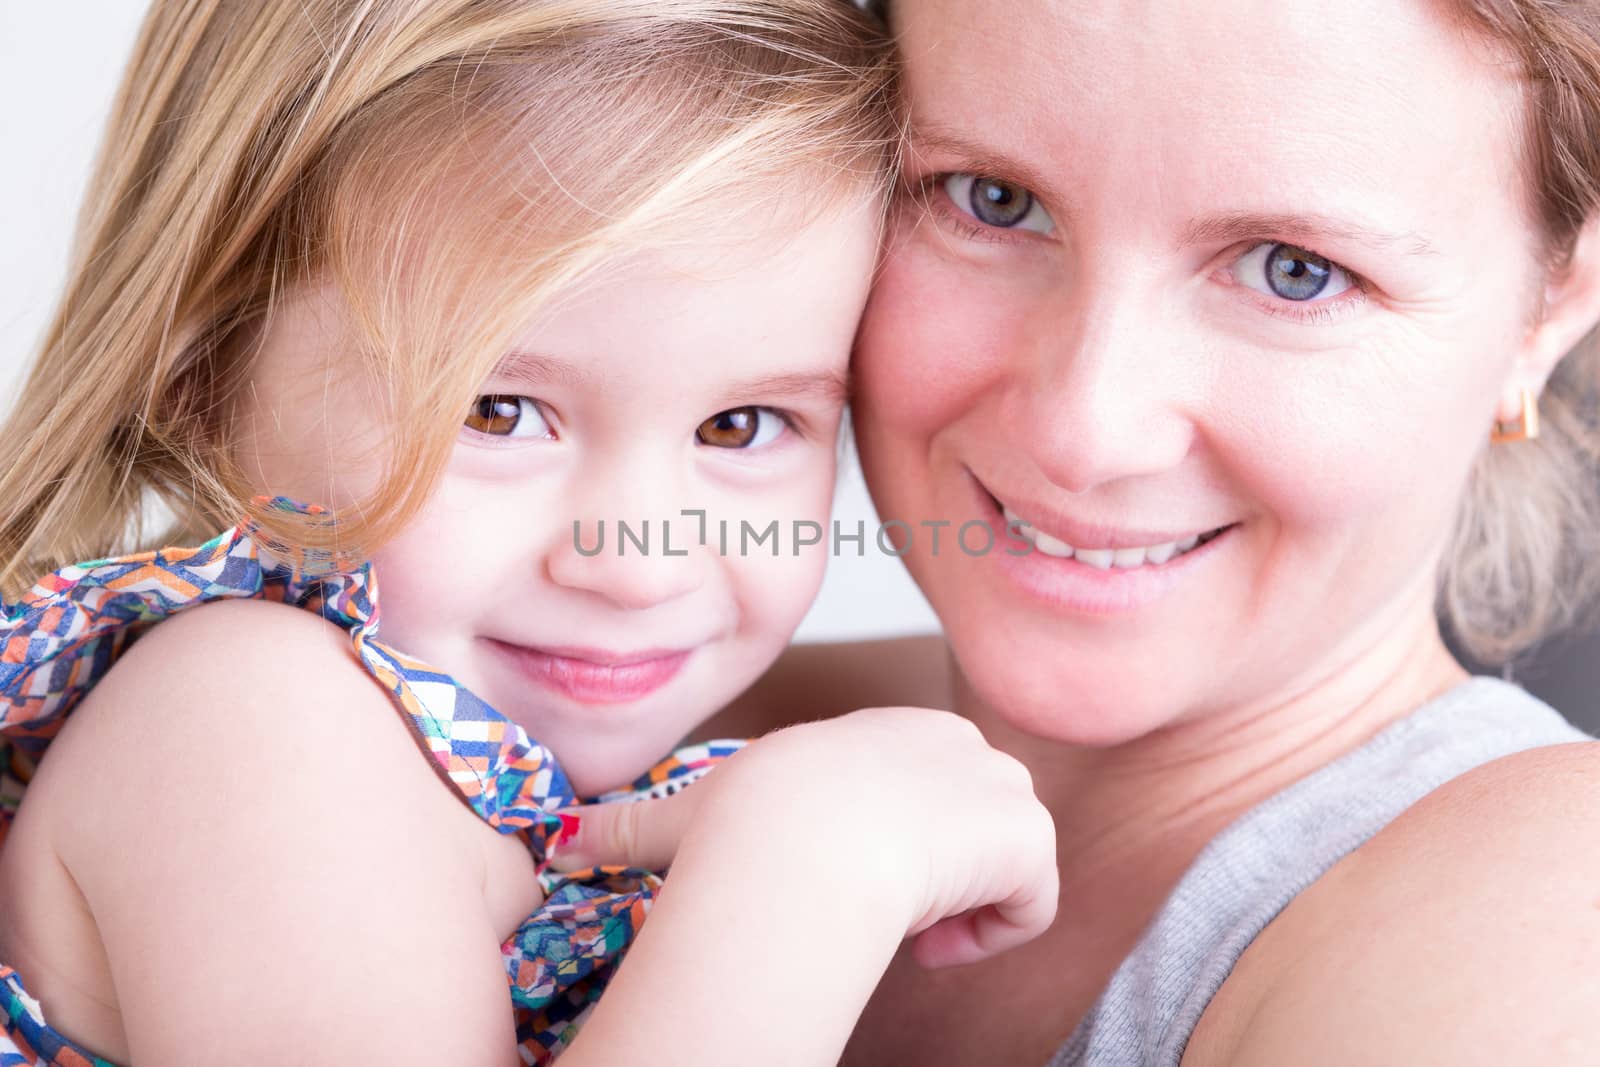 Close up facial portrait of a happy smiling beautiful little girl with her mother looking at the camera sharing a tender moment